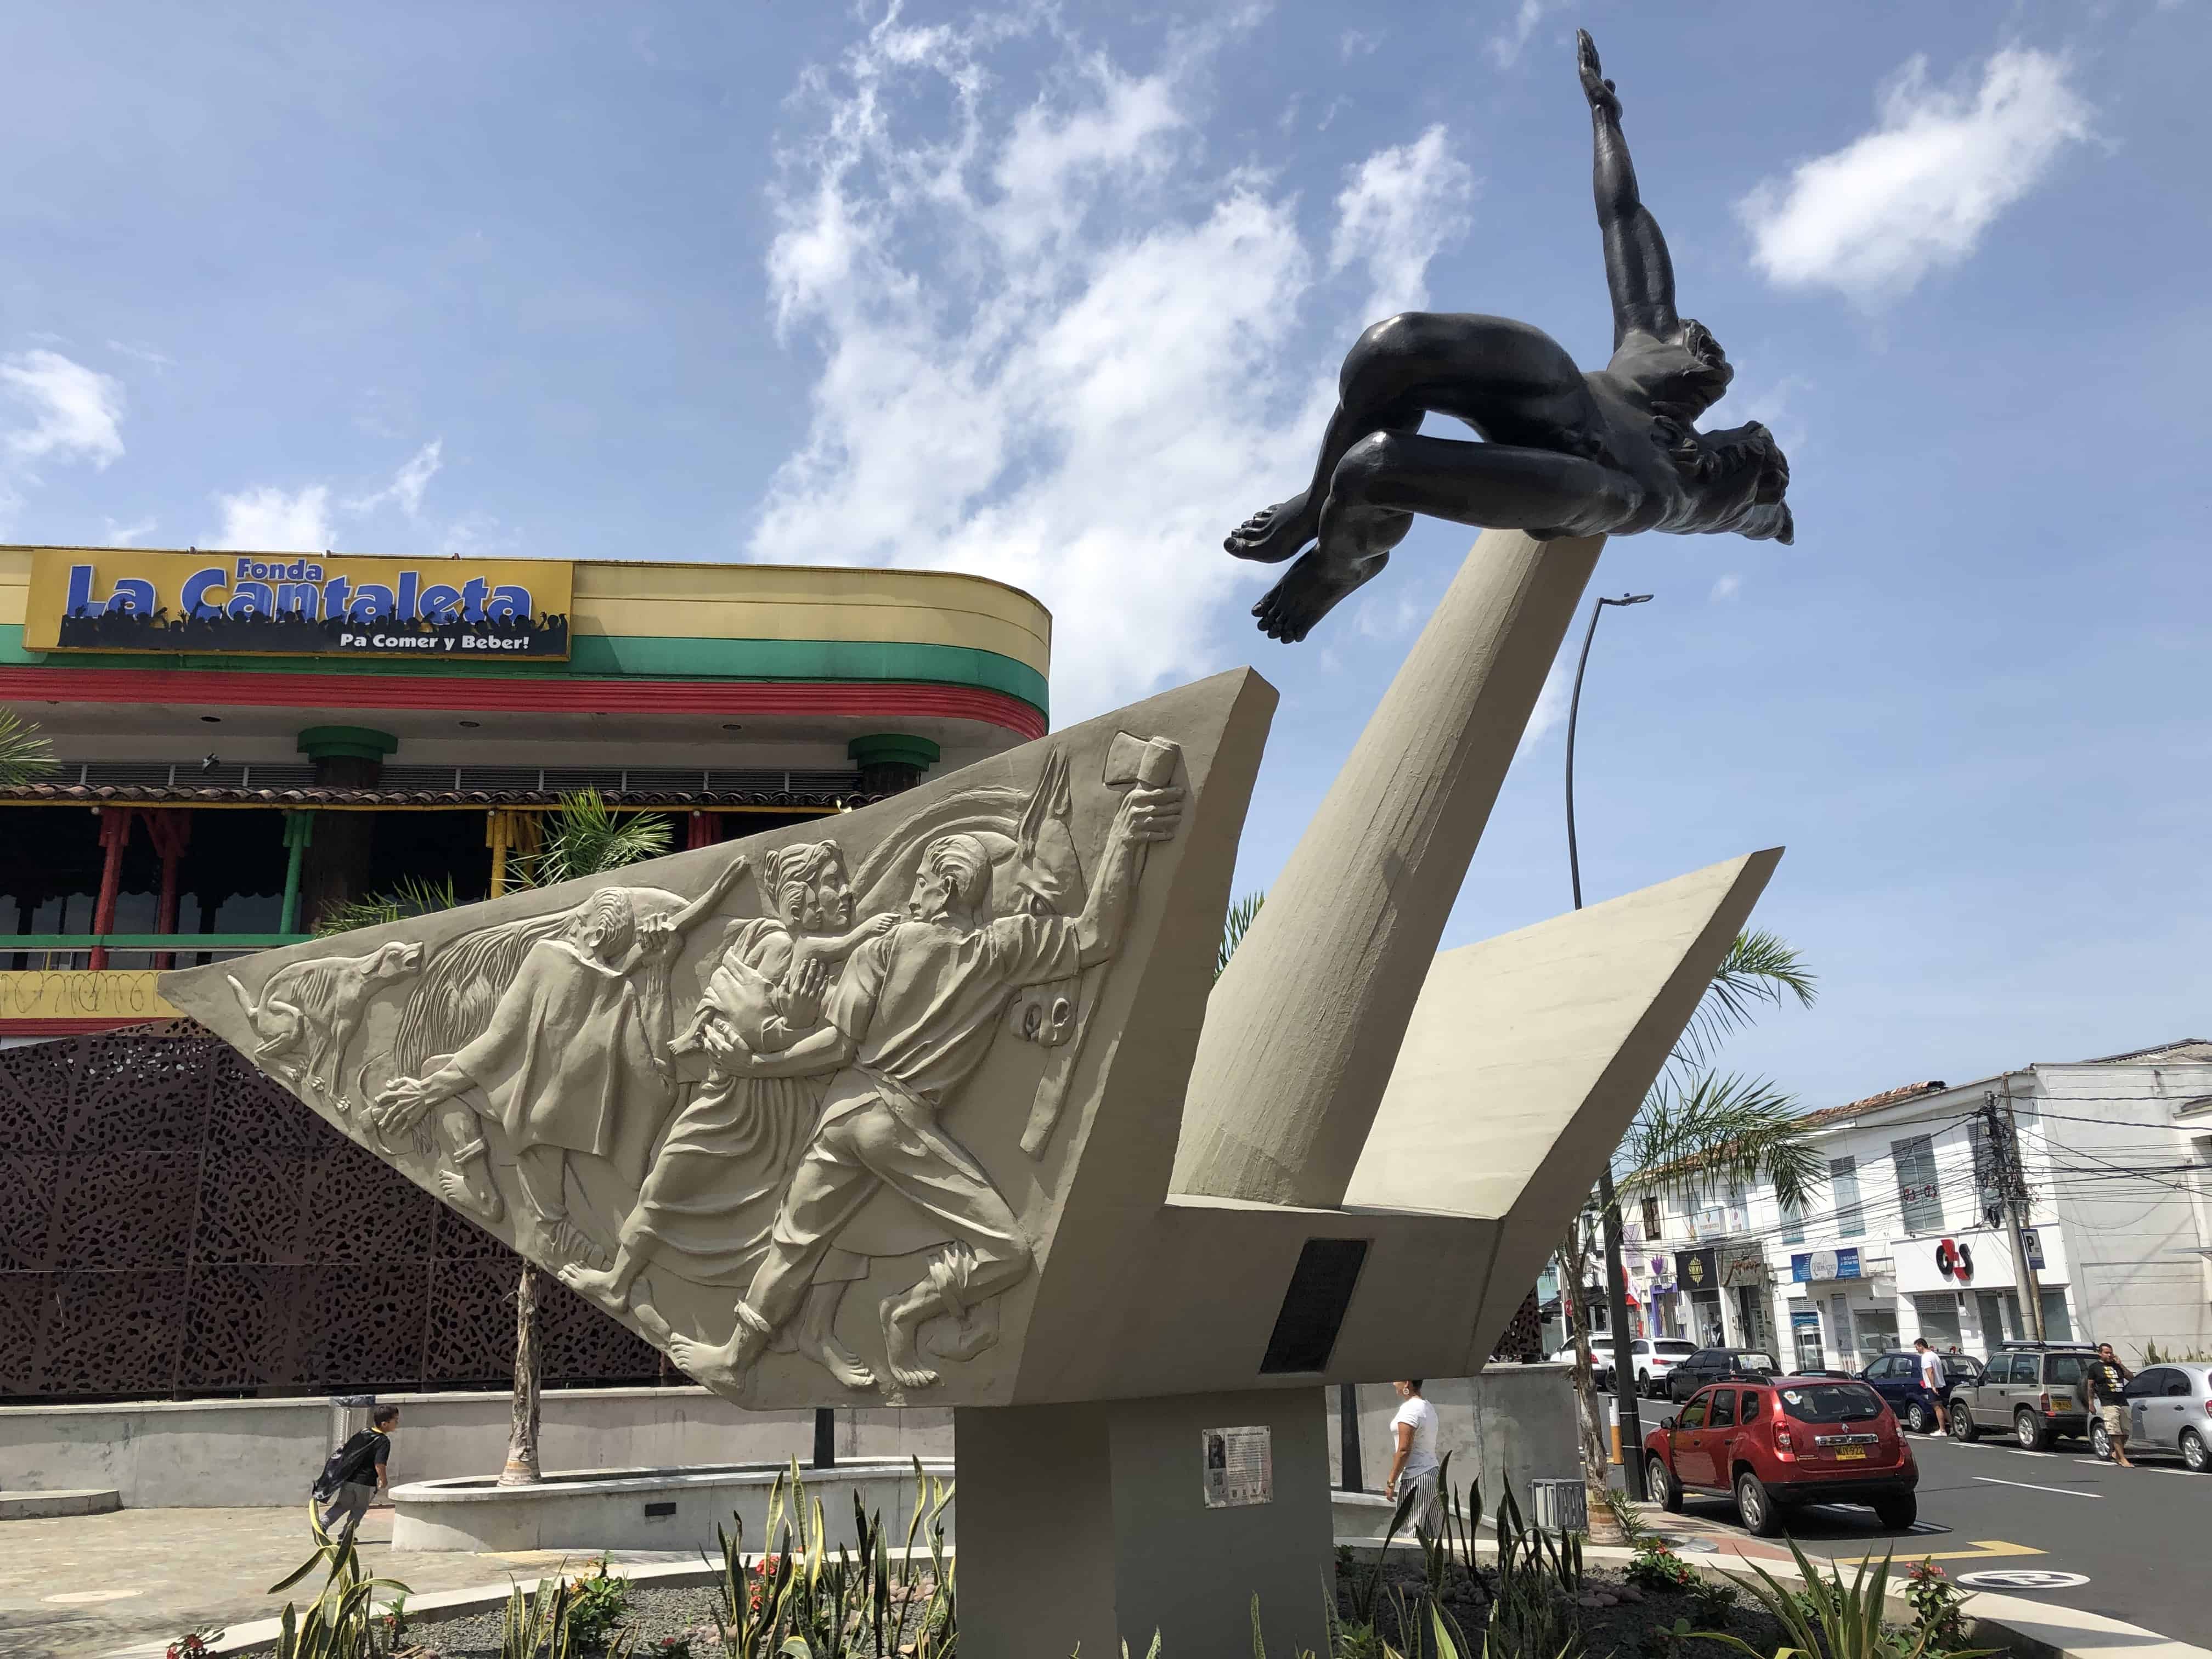 Monument to the Founders on Circunvalar in Pereira, Risaralda, Colombia